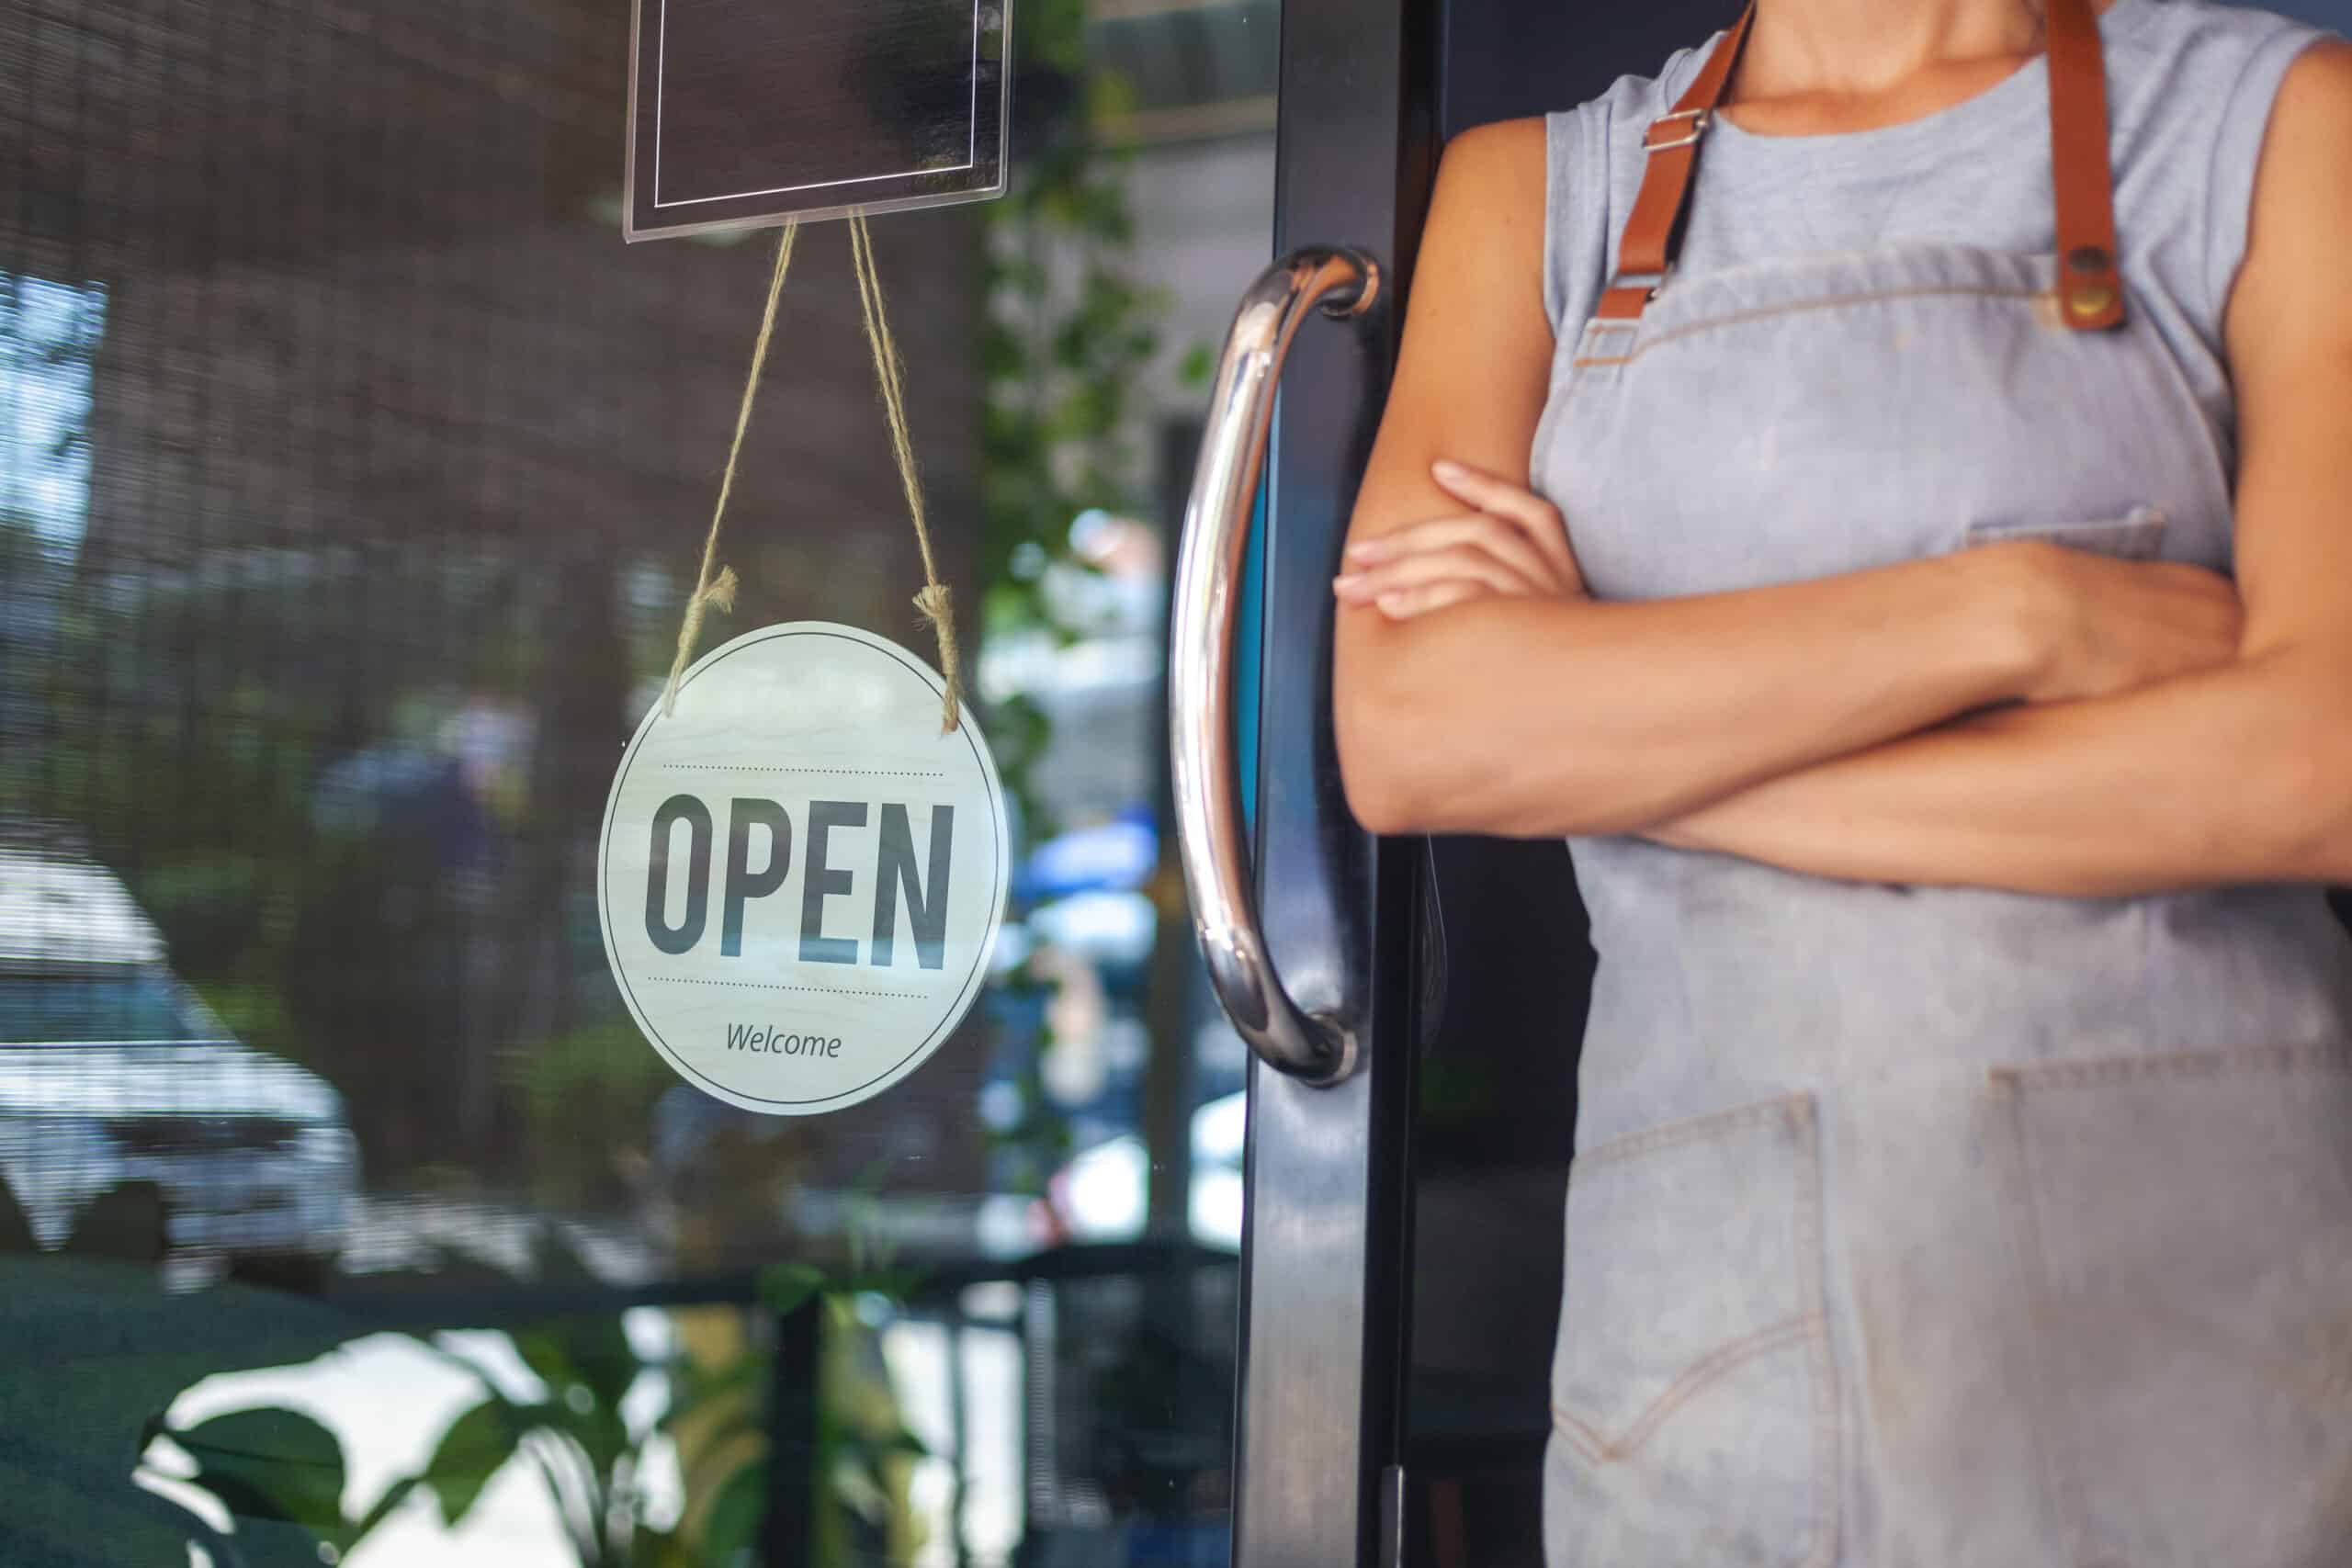 The woman is a waitress in an apron, the owner of the cafe stands at the door with a sign Open waiting for customers. Small business concept, cafes and restaurants